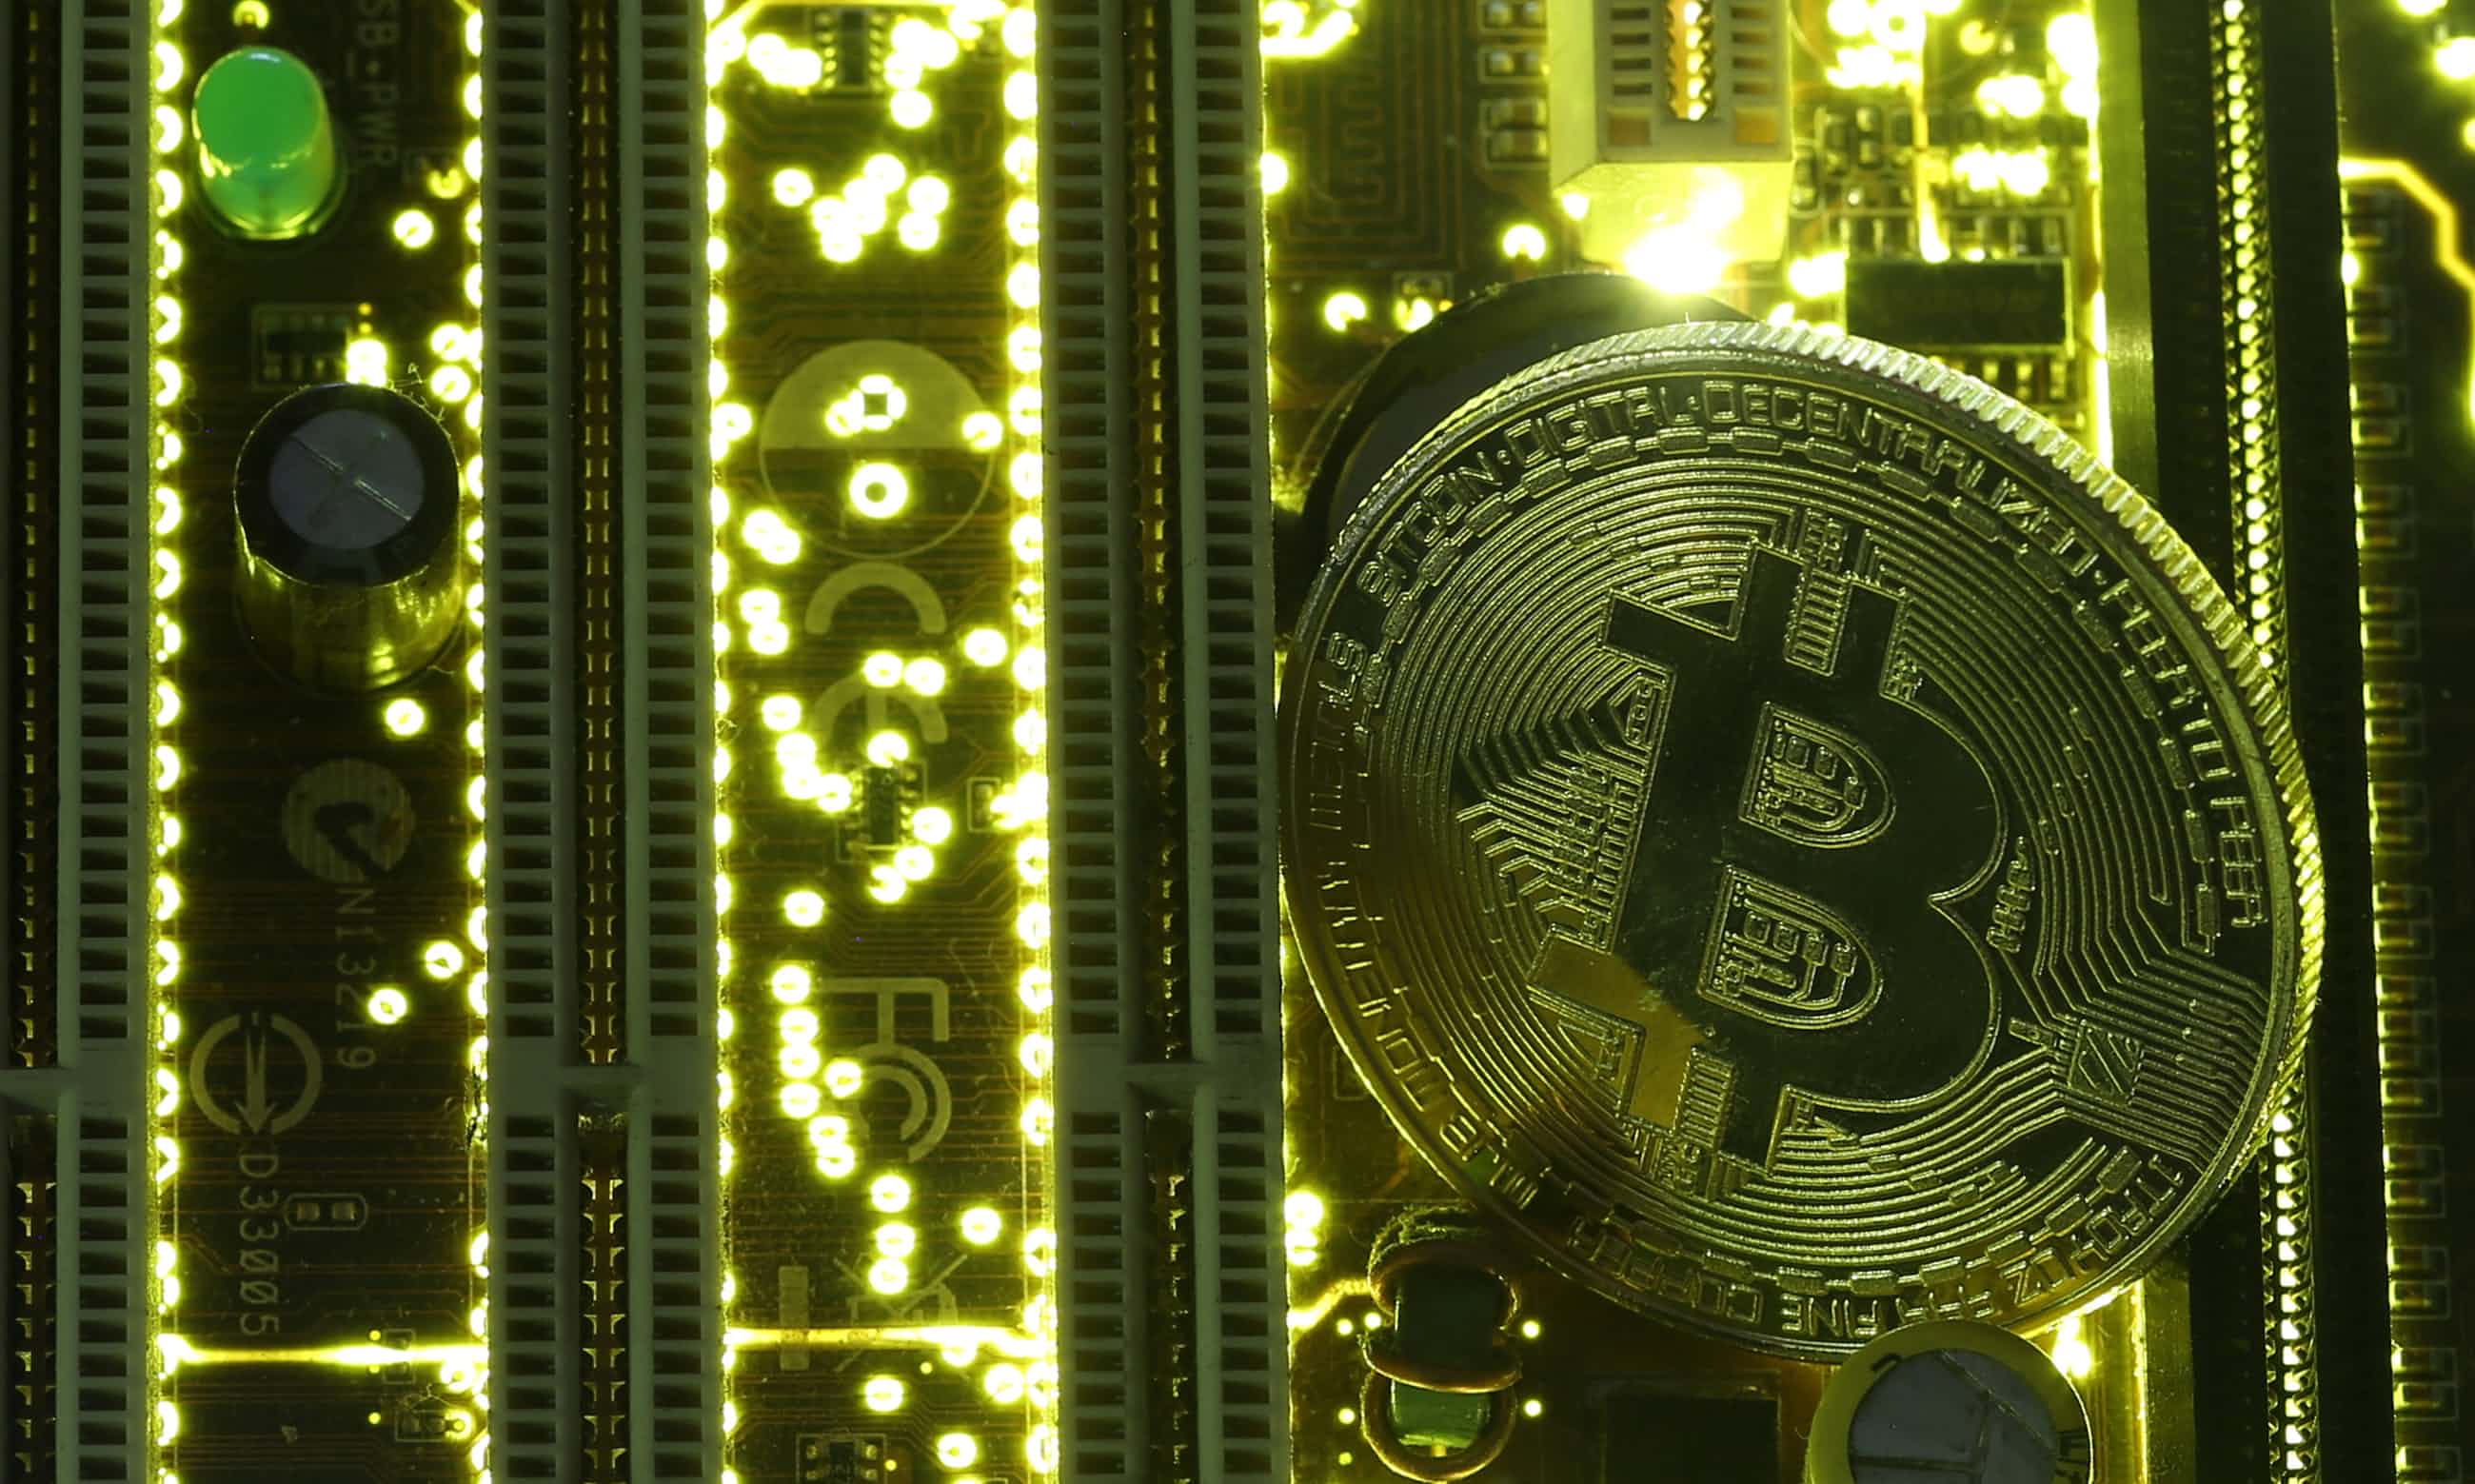 Everything you wanted to know about bitcoin but were afraid to ask | Technology | The Guardian